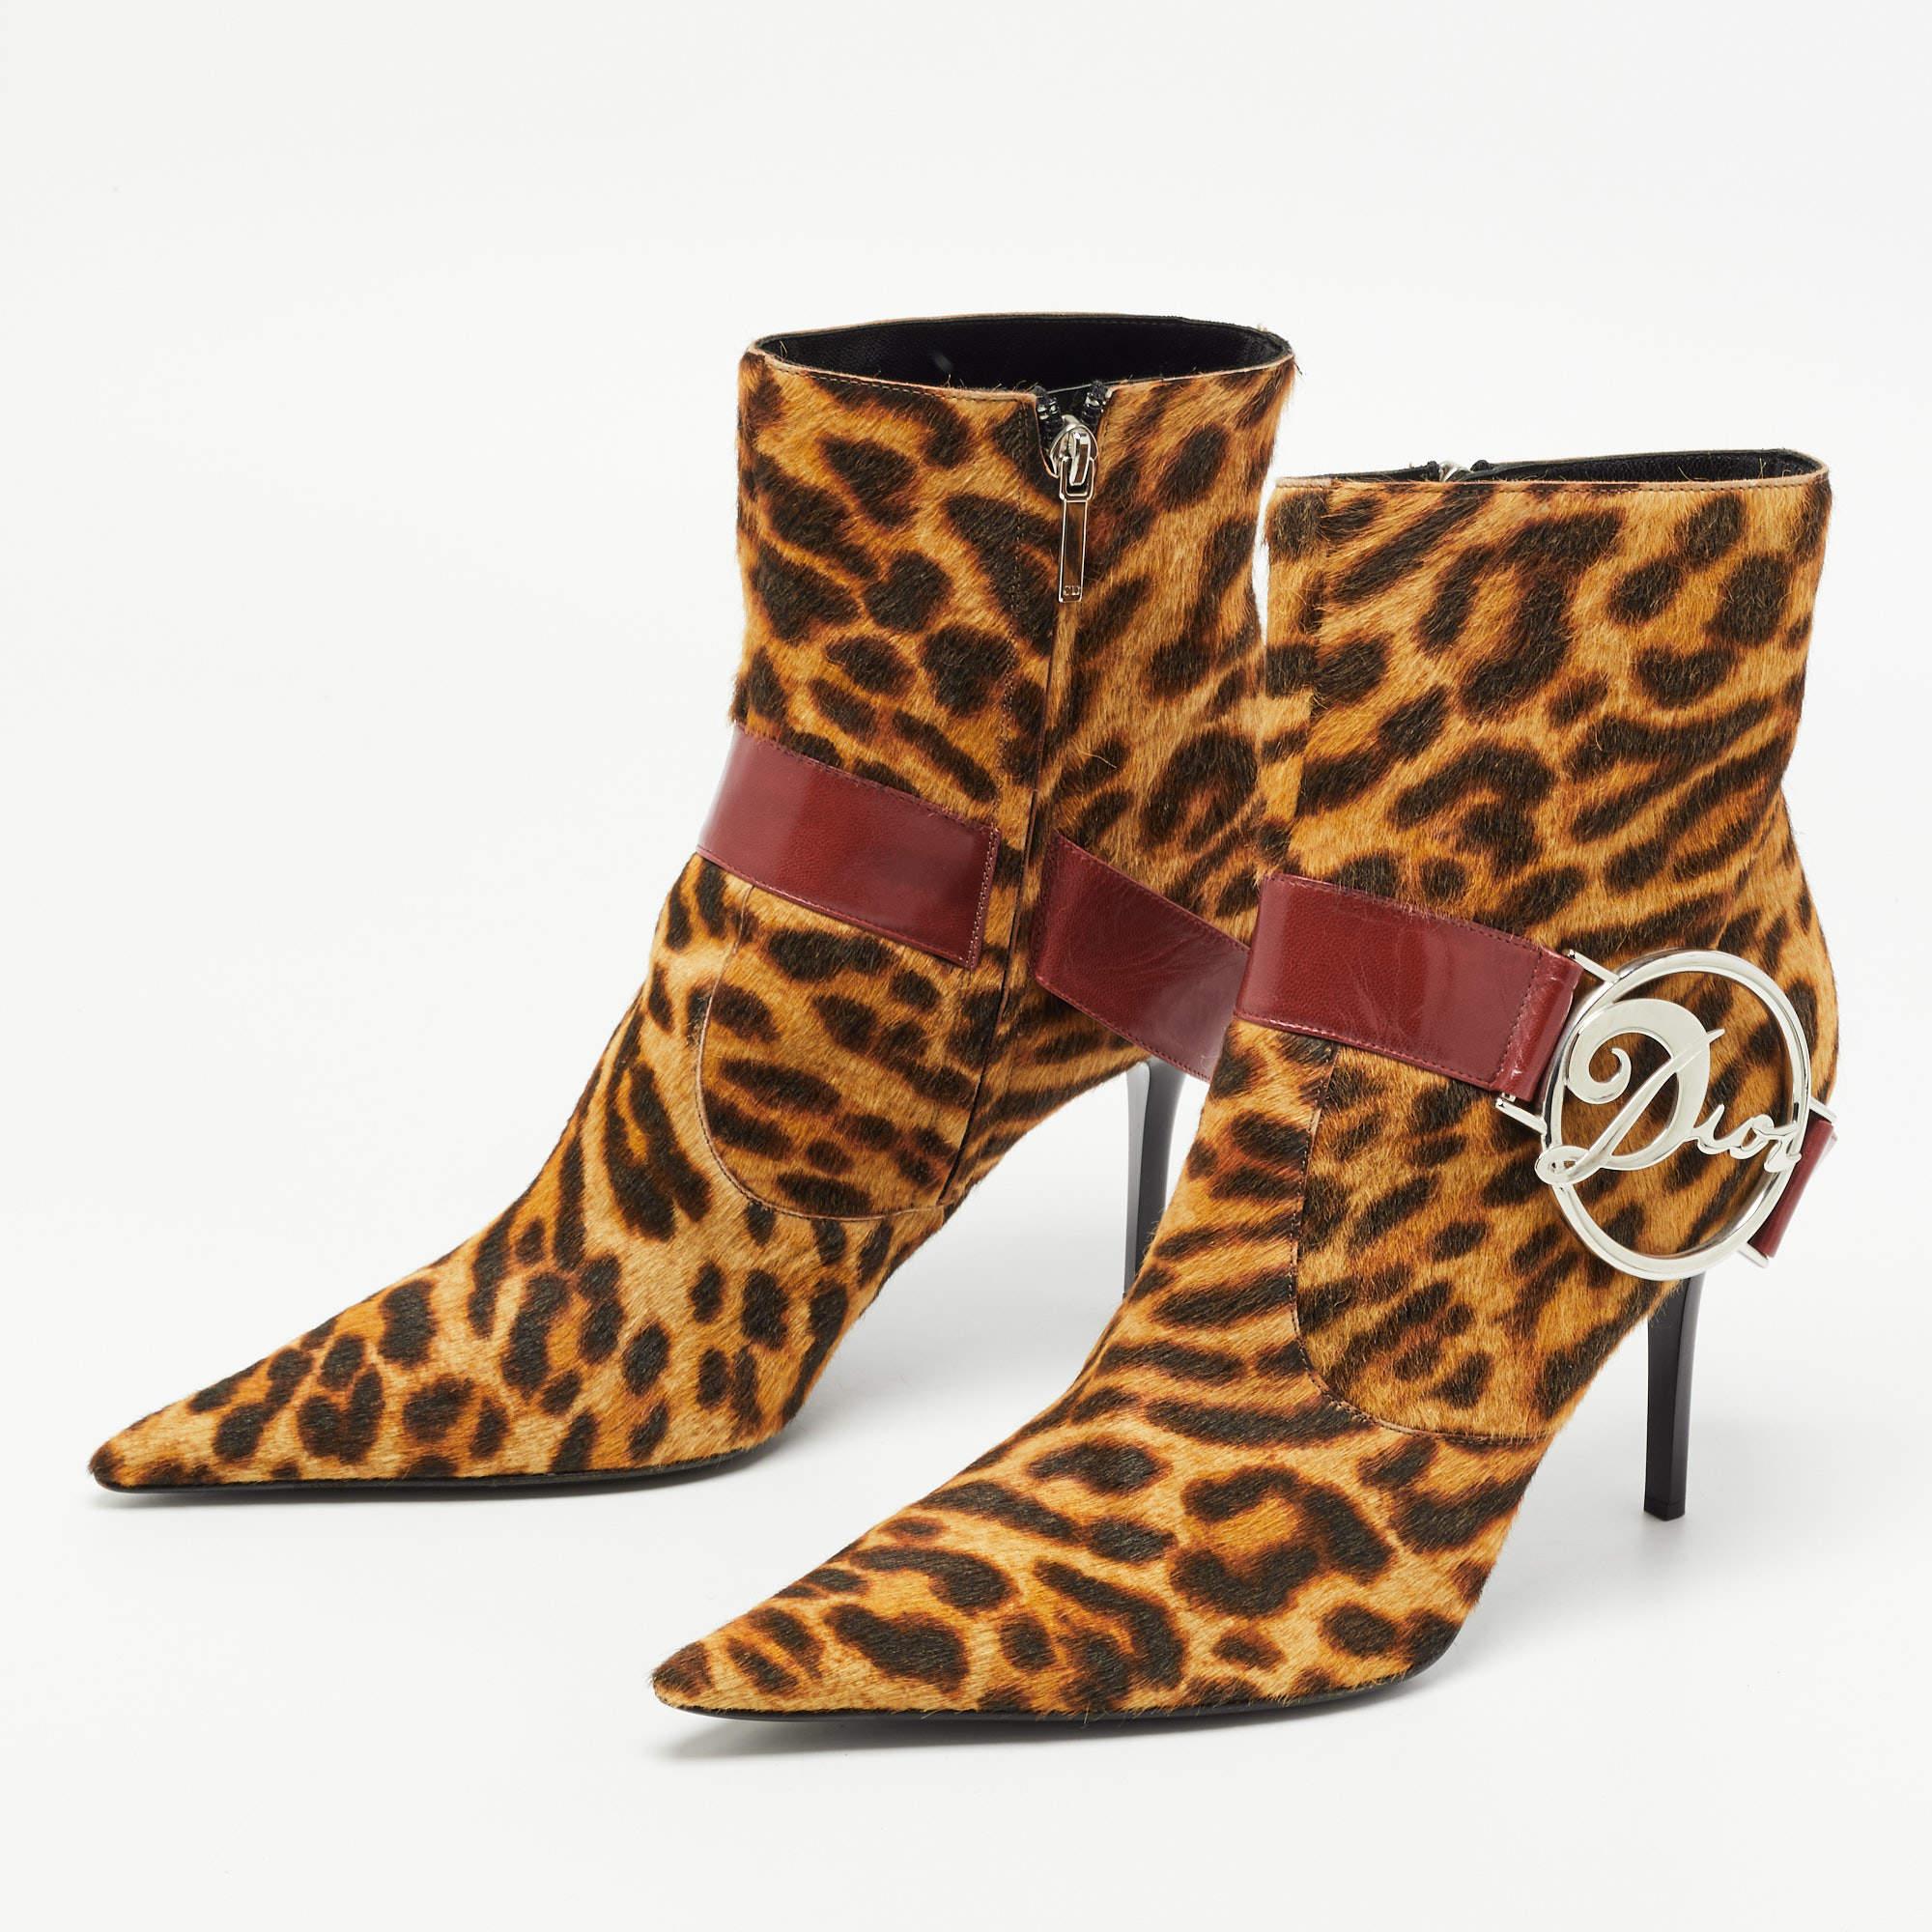 Dior Tricolor Leopard Print Calf Hair and Leather Ankle Booties Size 41 In New Condition In Dubai, Al Qouz 2